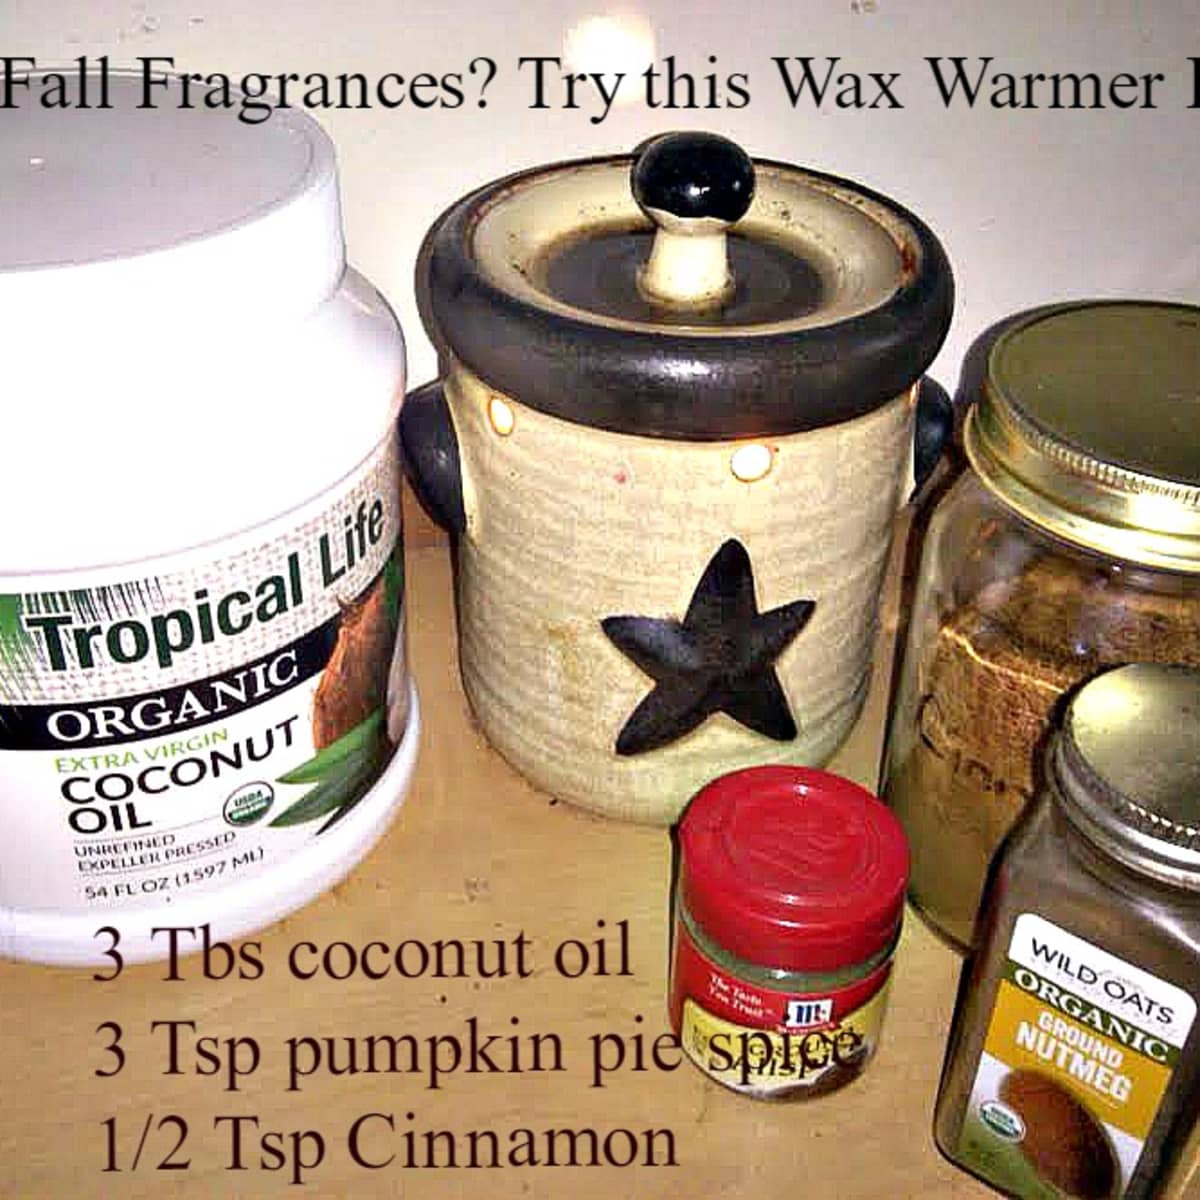 How much energy do wax warmers really use?